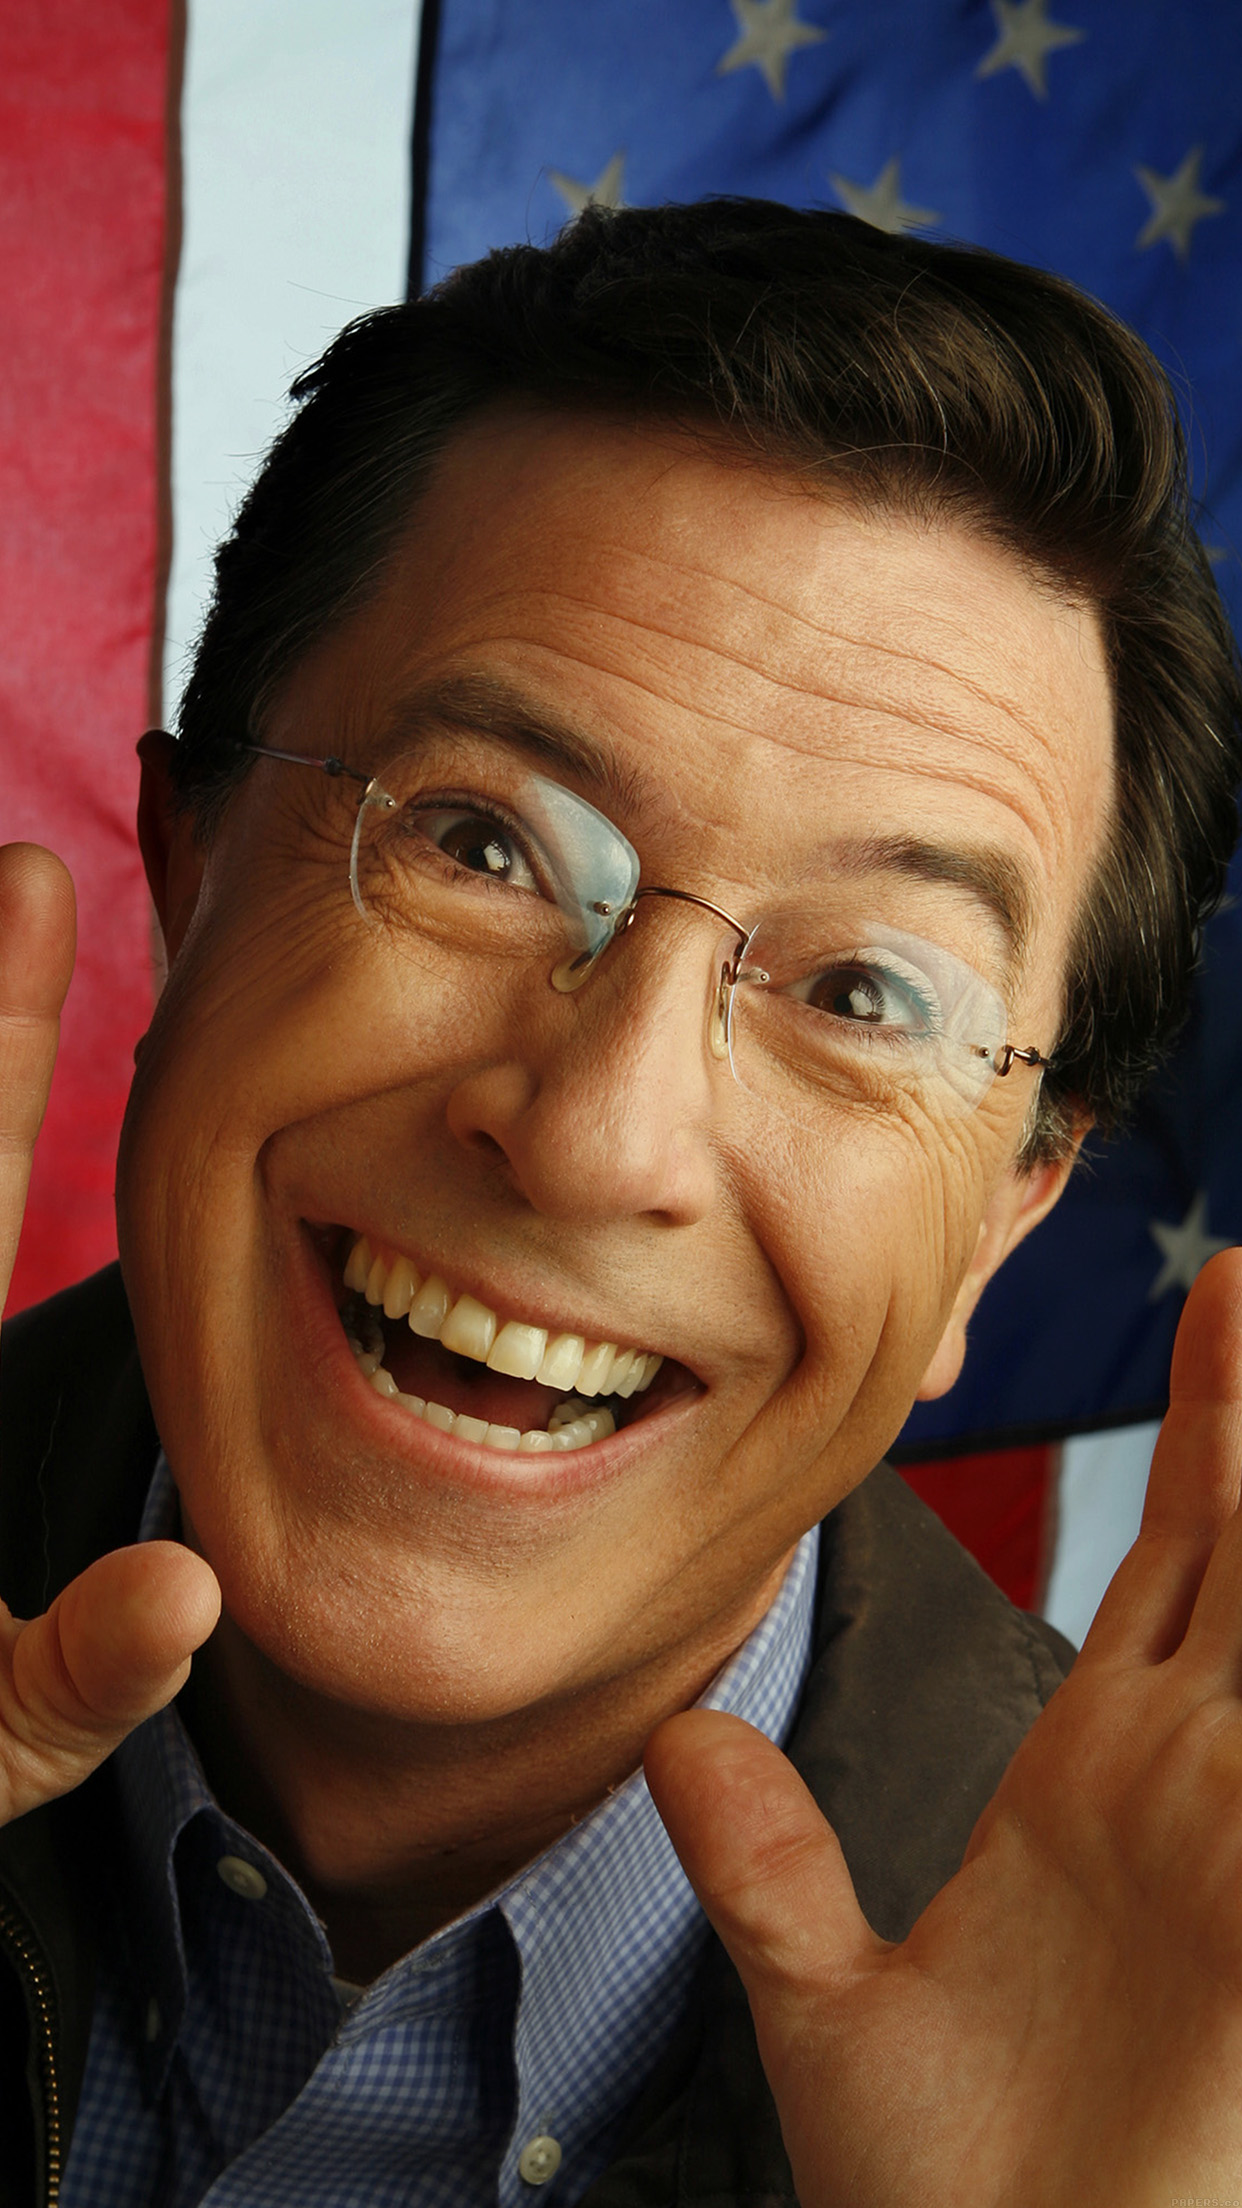 Colbert Report Celebrity Show Android wallpaper